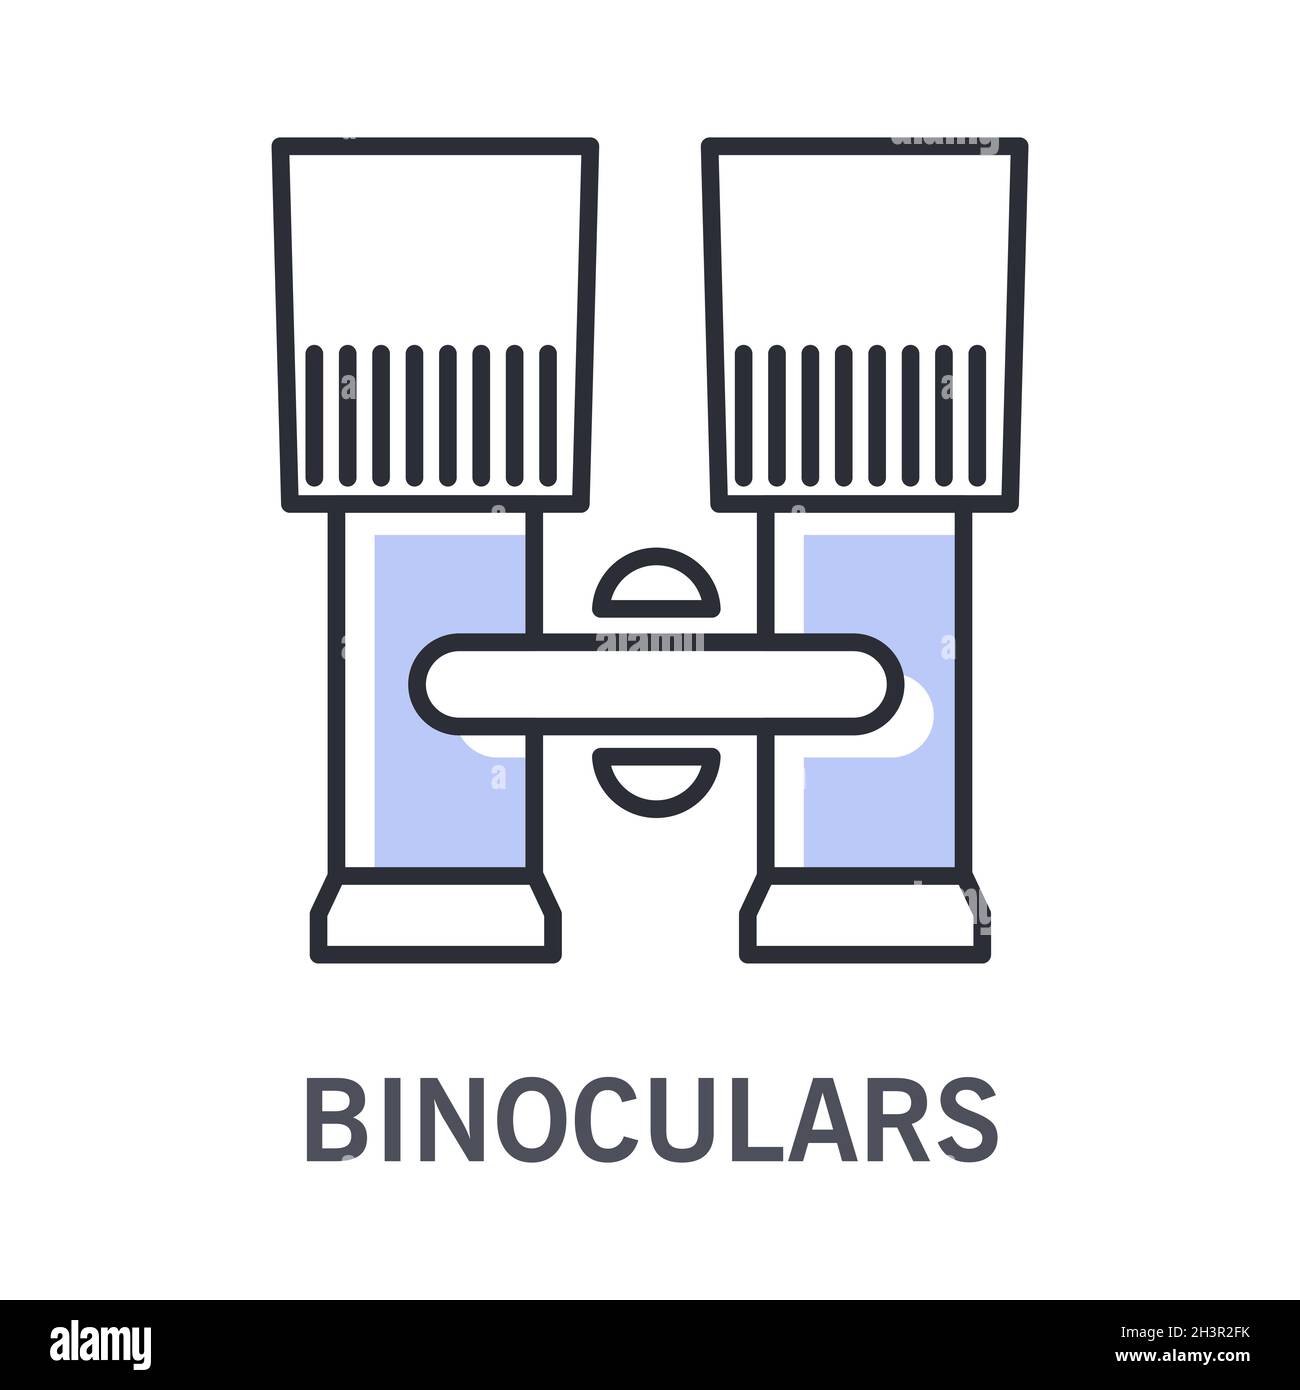 Binoculars isolated icon, vision tool or device with zoom Stock Vector